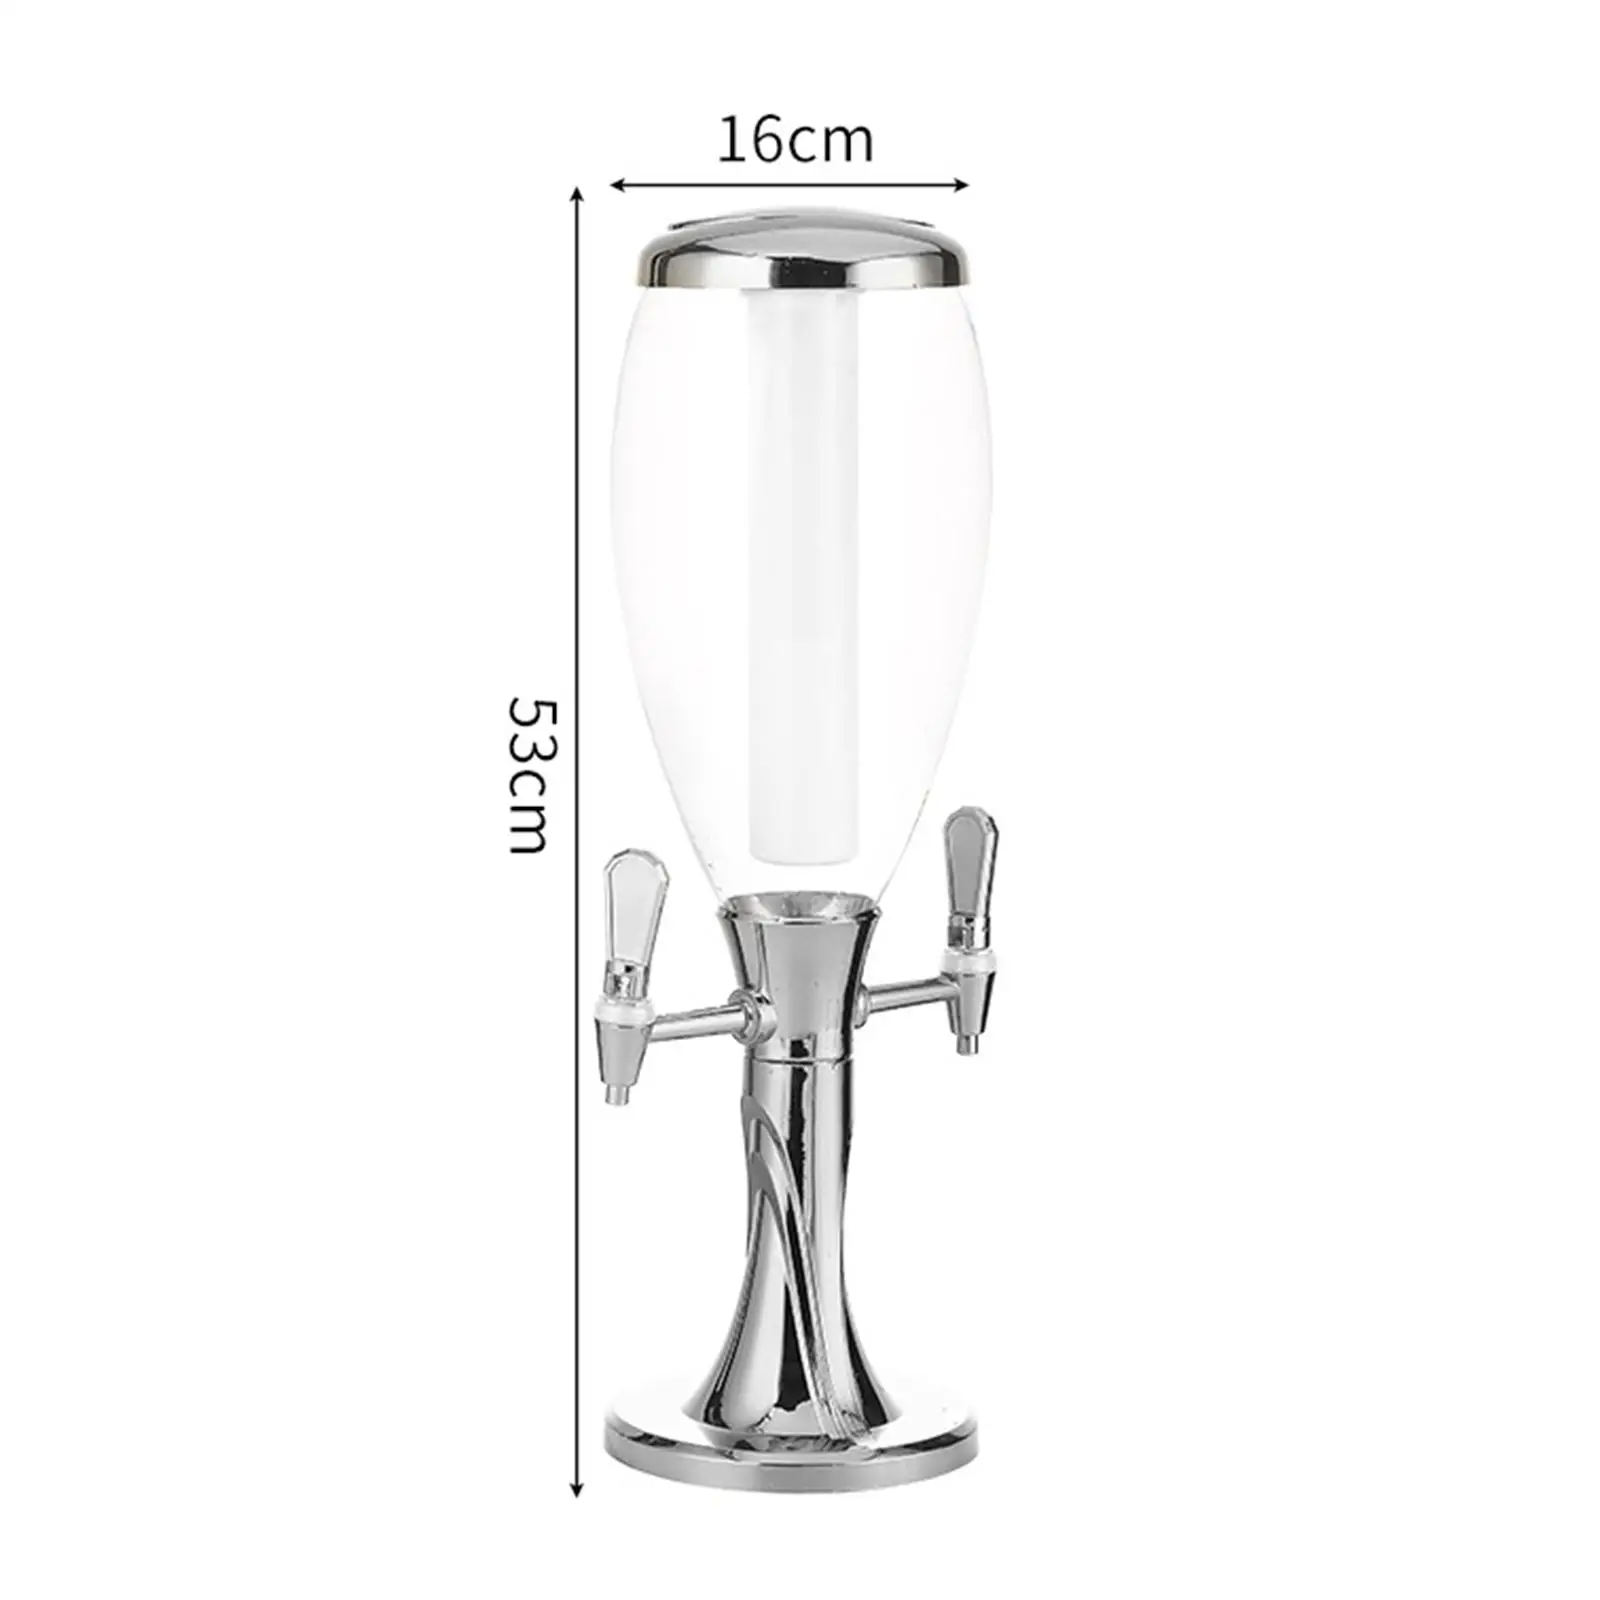 Beer Tower Beer Pourer Stable 1.5L to 3L with Colorful Light Beer Dispenser with Spigot for Bars Rvs Kitchens Gameday Outdoor